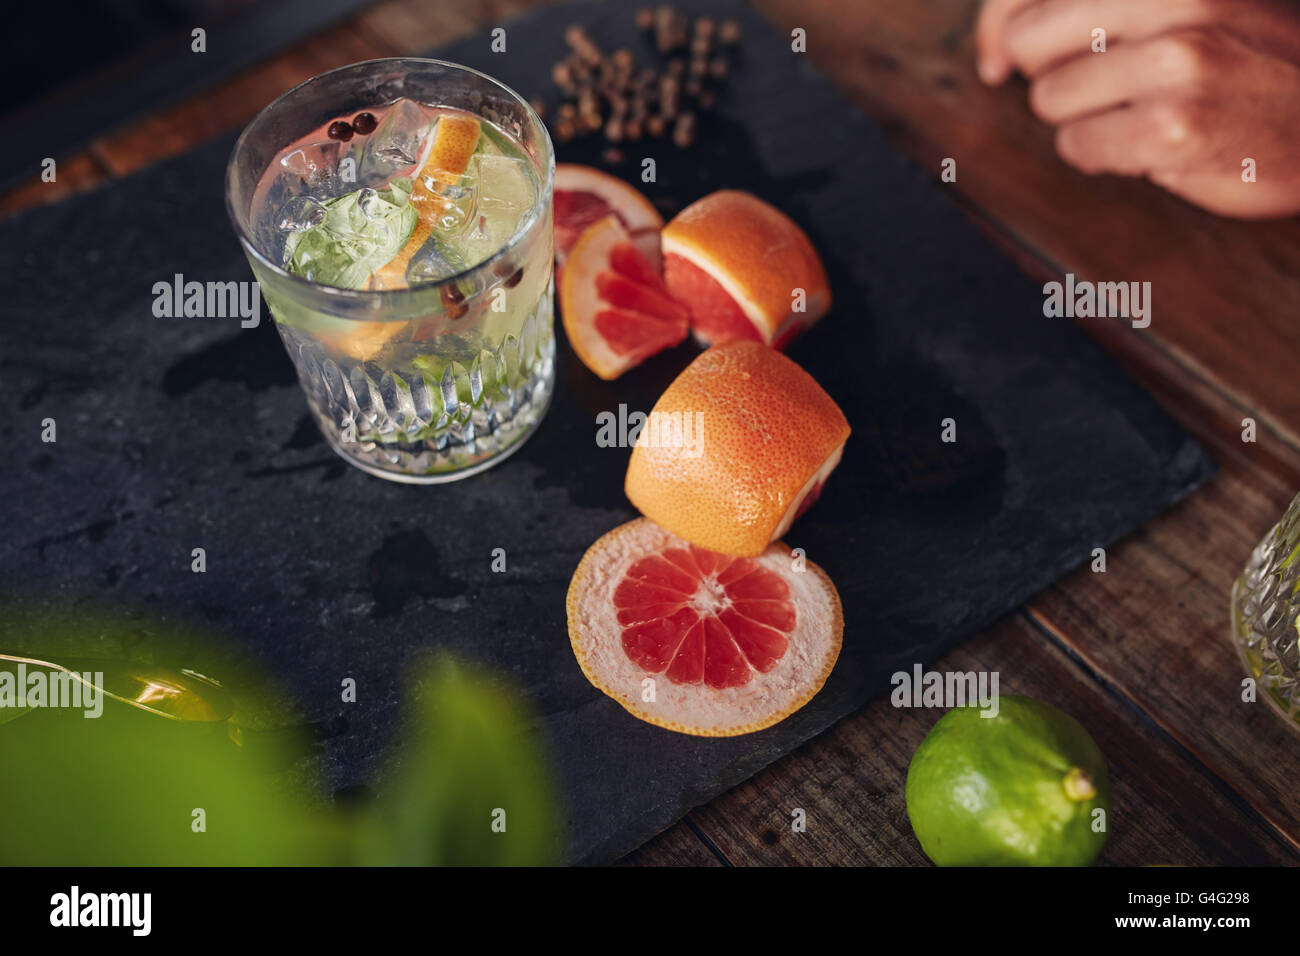 Close up image of freshly prepared cocktail drink with grapefruit slices on table. Stock Photo